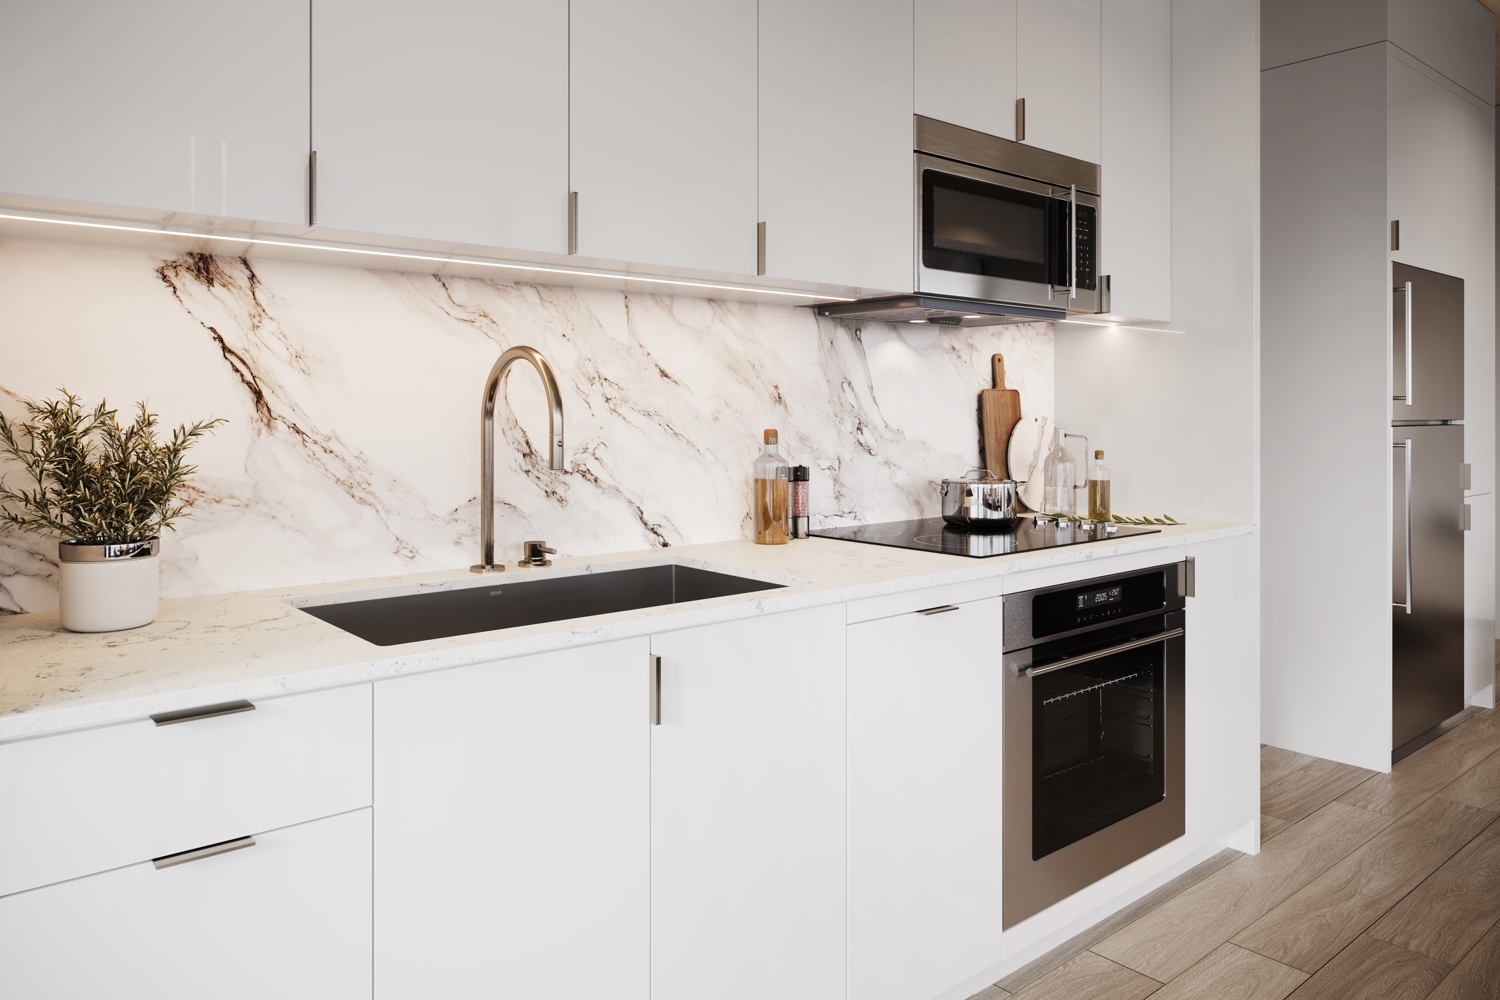 Interior of a kitchen with marble blacksplash and white cabinets